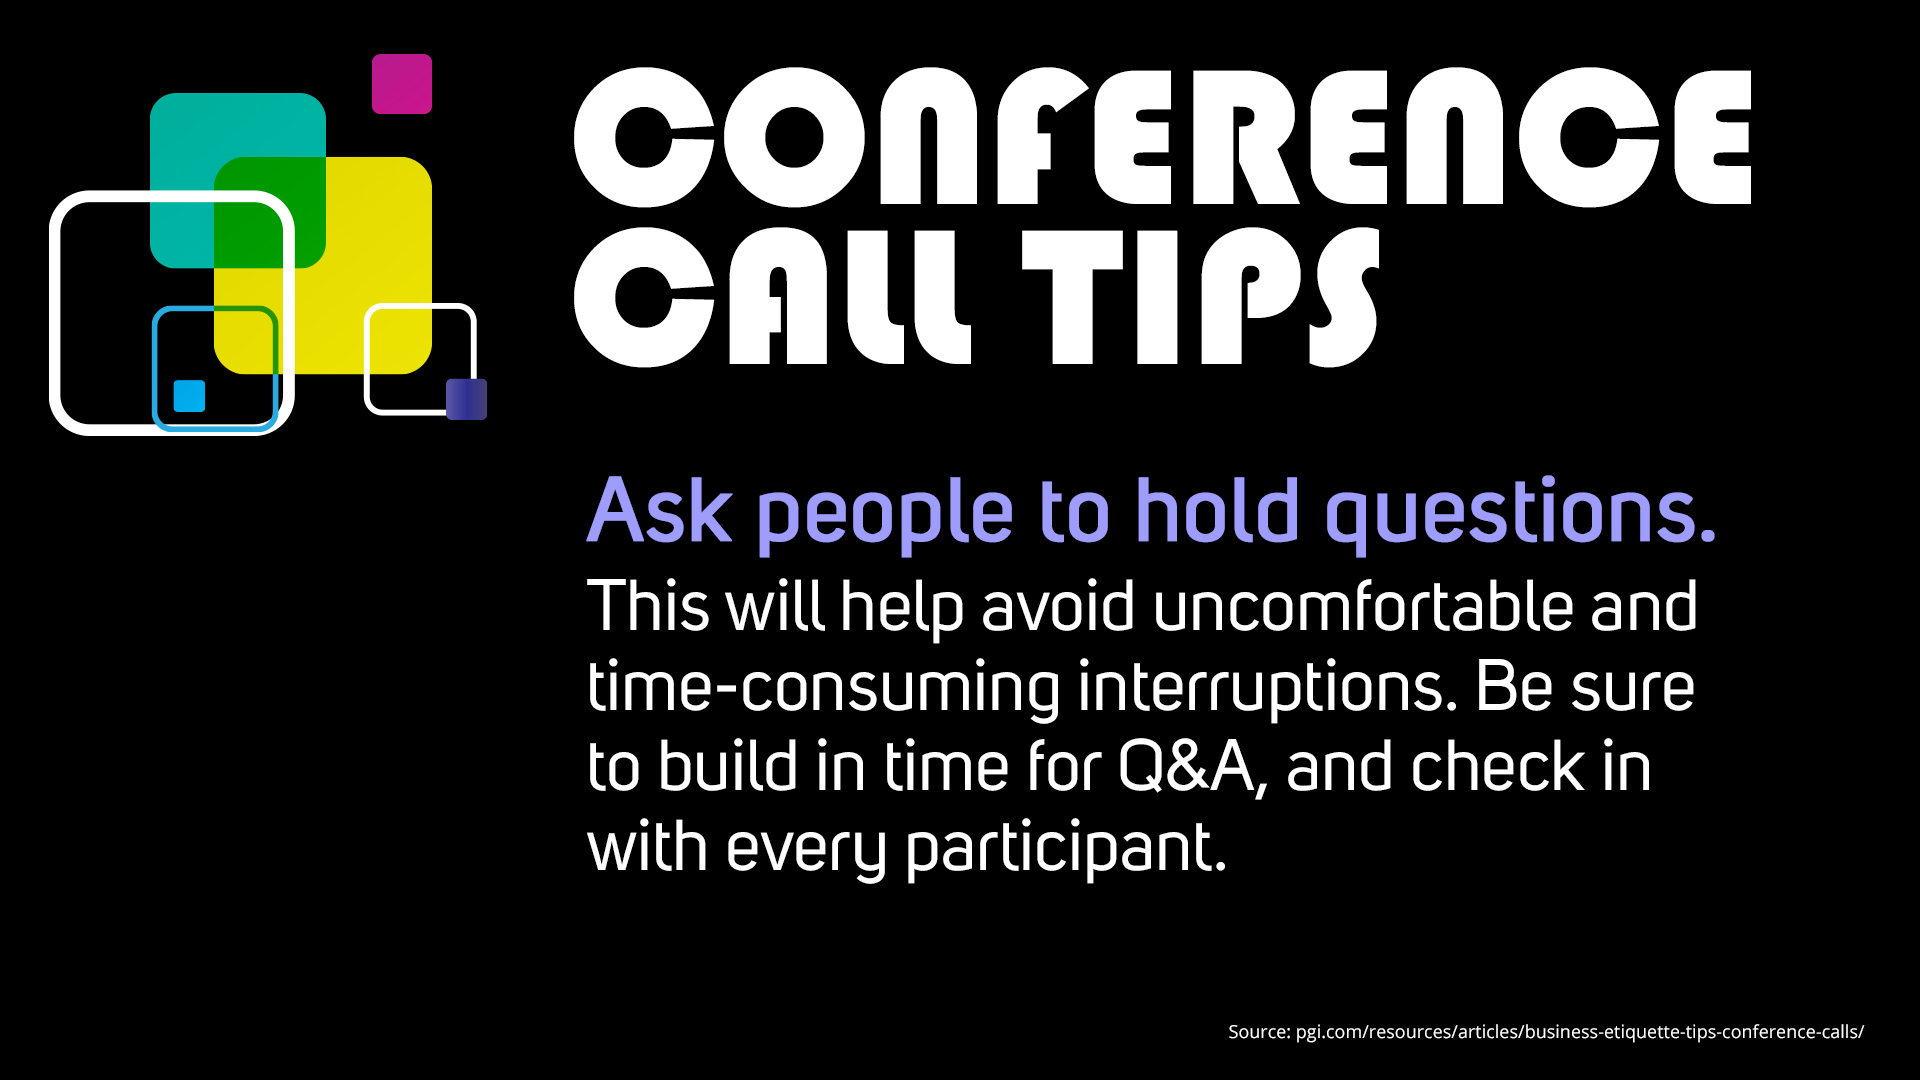 Free Graphic | Conference Call Tips | Ask people to hold questions